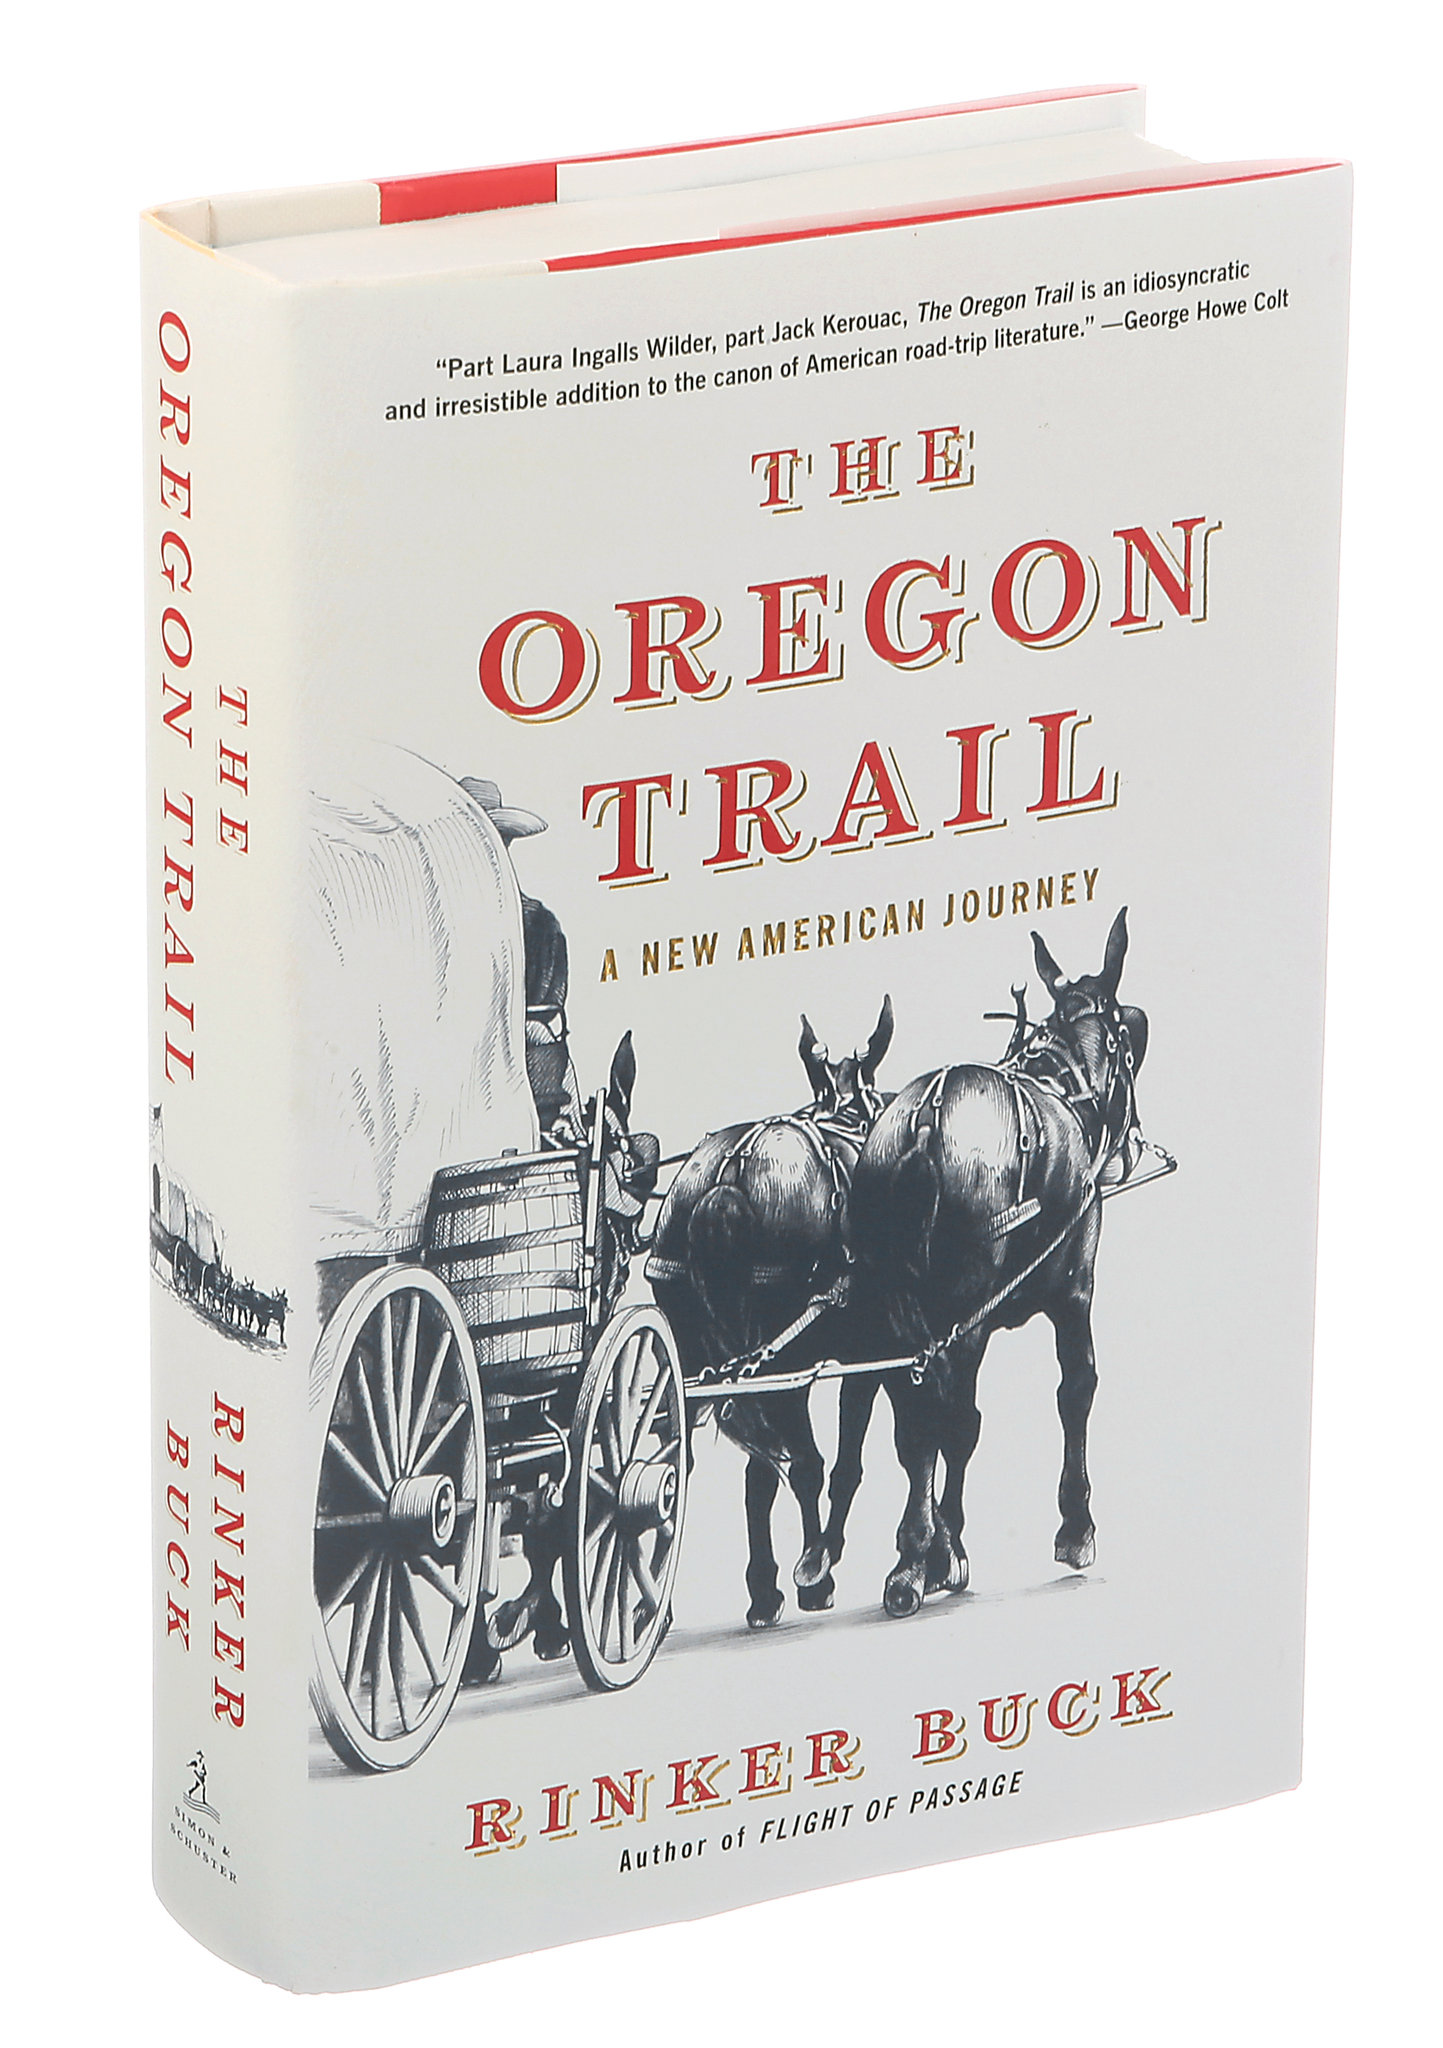 The Oregon Trail: A New American Journey book by Rinker Buck